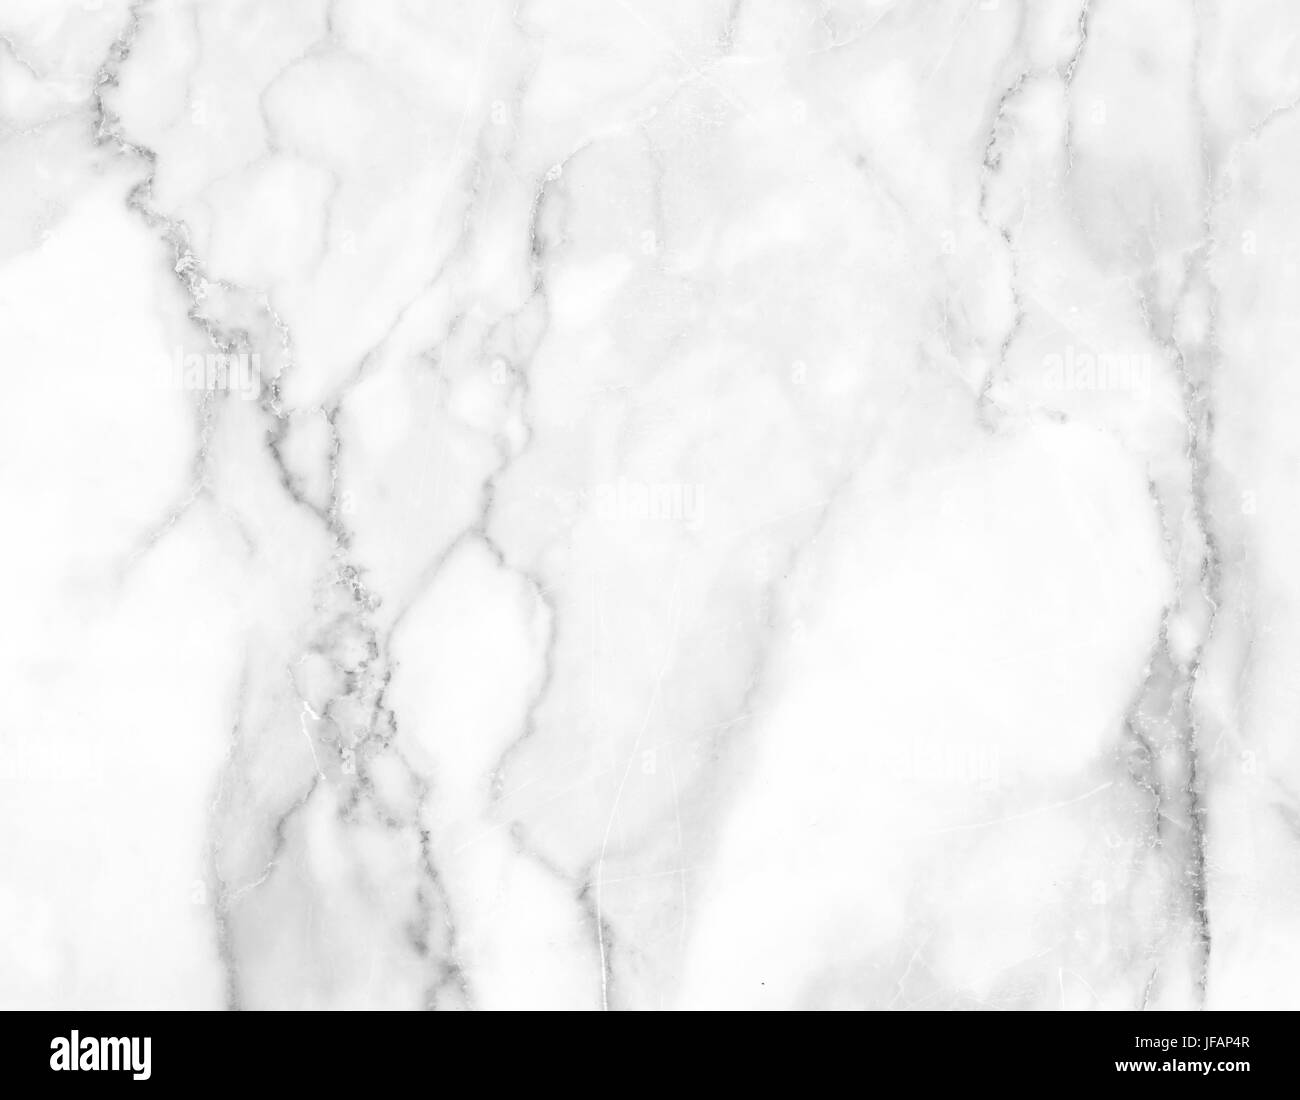 White marble background High resolution abstract stone slabs Stock Photo -  Alamy